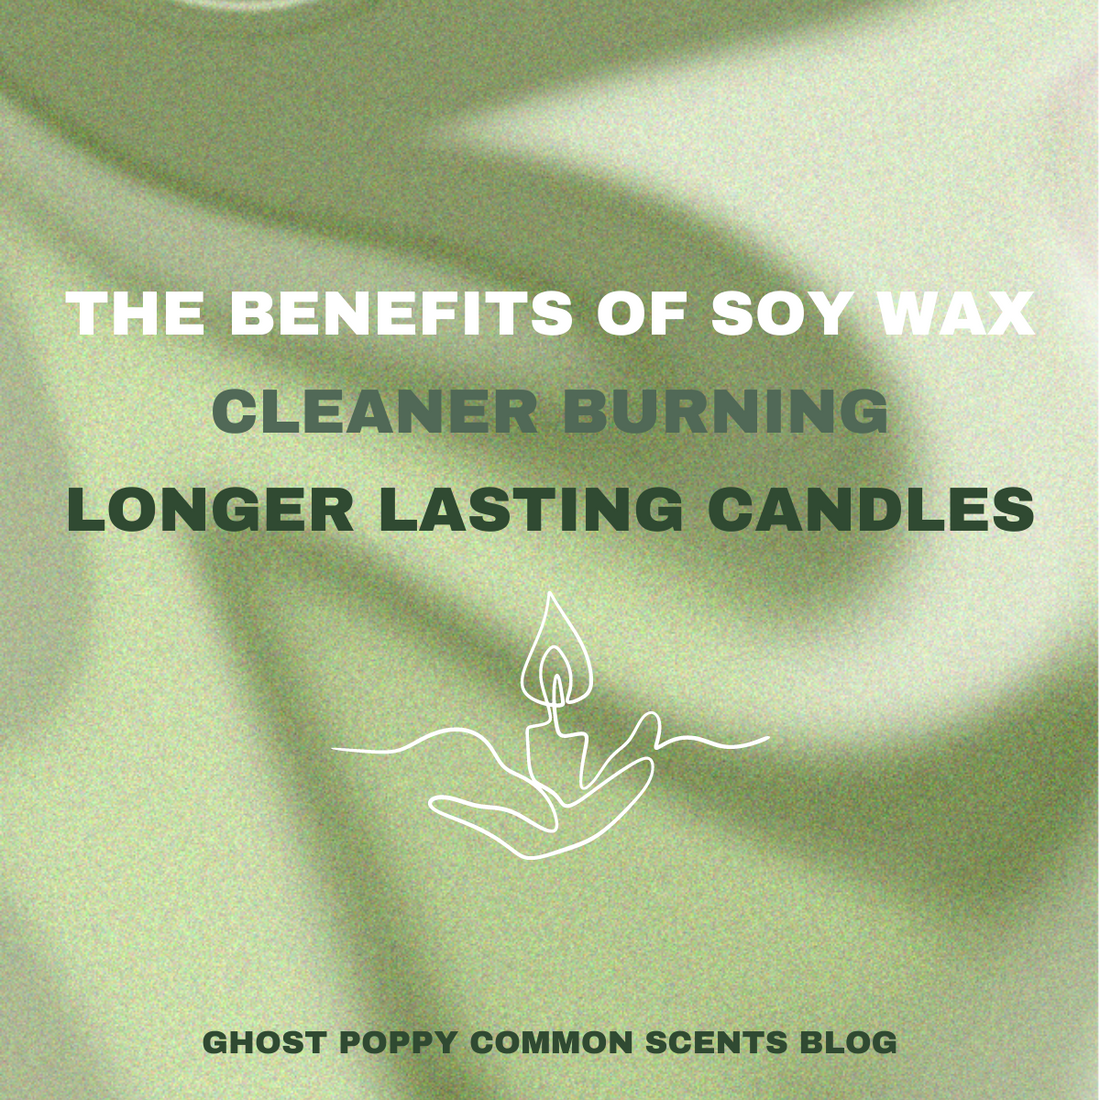 The Benefits of Soy Wax- Cleaner Burning, Longer Lasting Candles